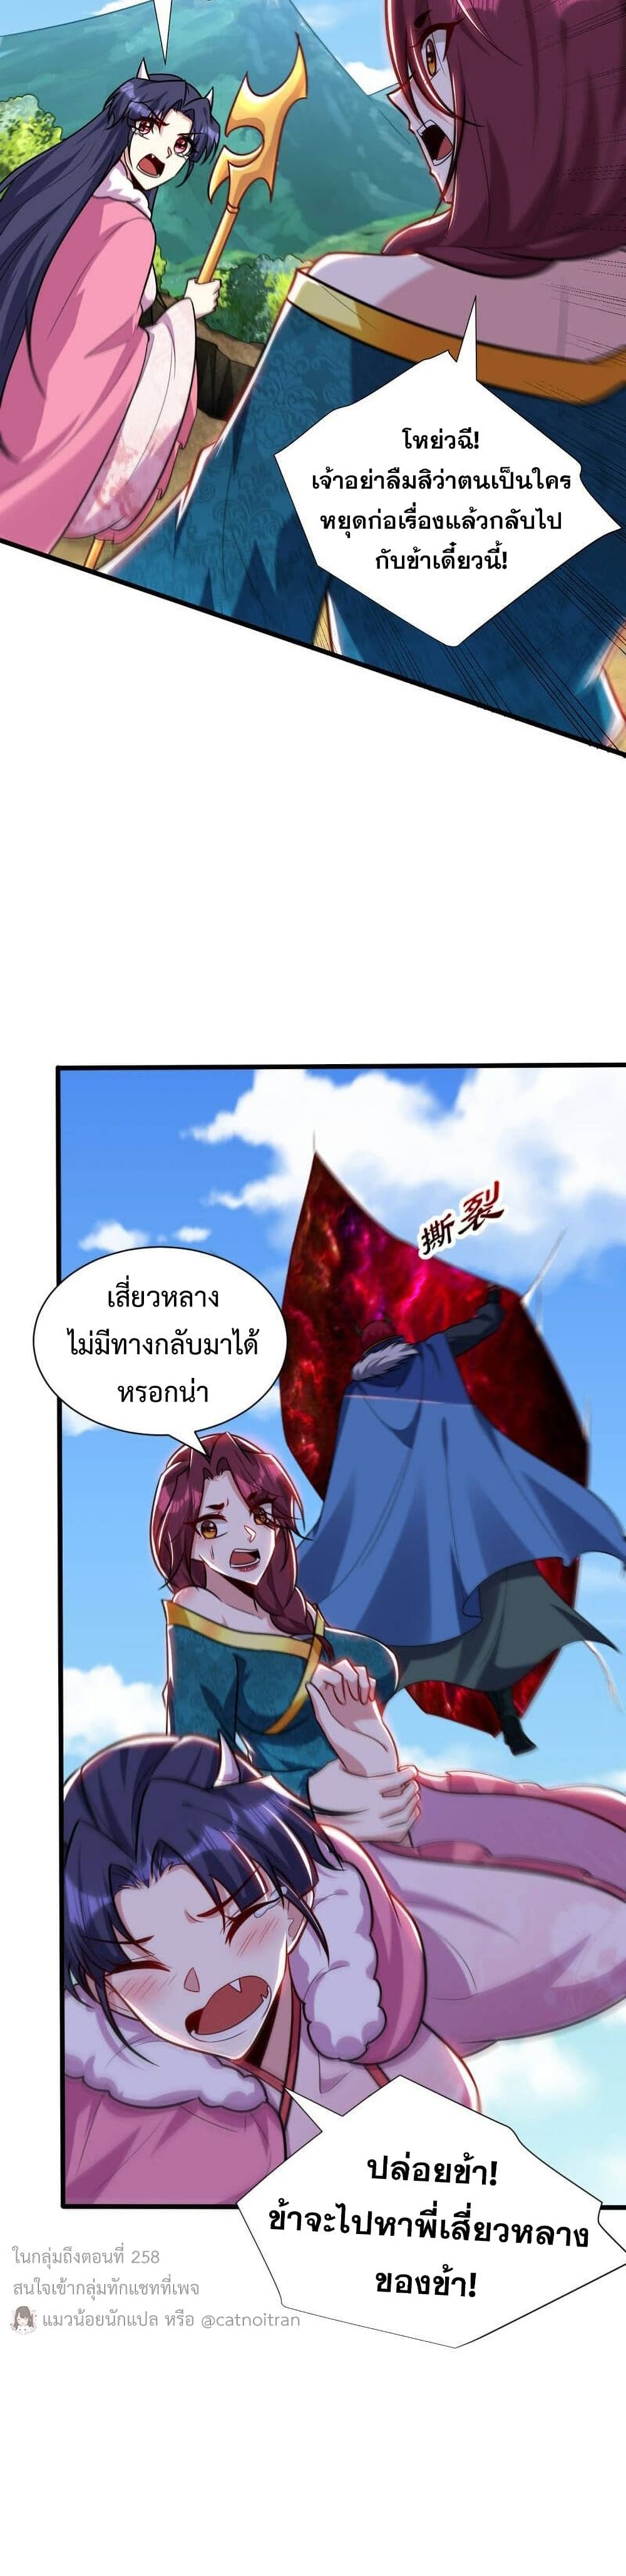 Rise of The Demon King เธฃเธธเนเธเธญเธฃเธธเธ“เนเธซเนเธเธฃเธฒเธเธฒเธเธตเธจเธฒเธ เธ•เธญเธเธ—เธตเน 256 (21)